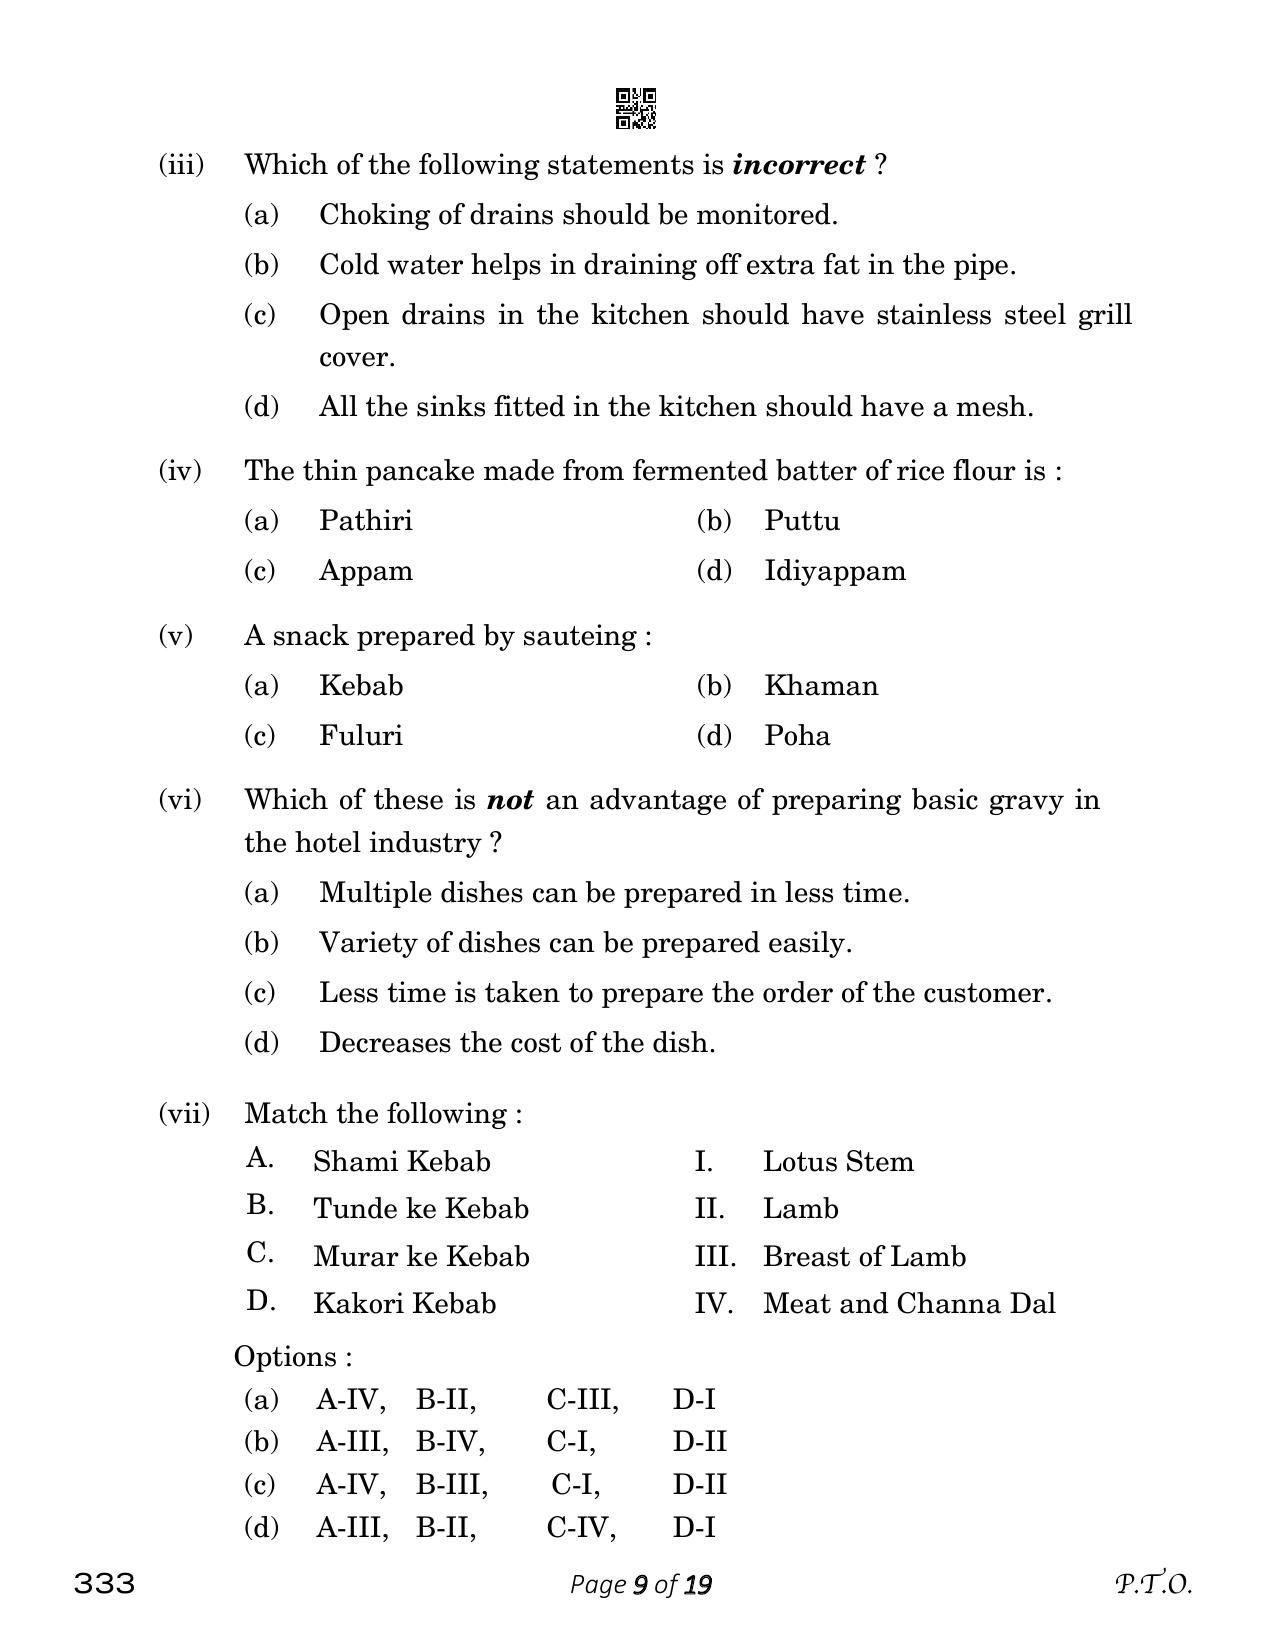 CBSE Class 12 food Production (Compartment) 2023 Question Paper - Page 9